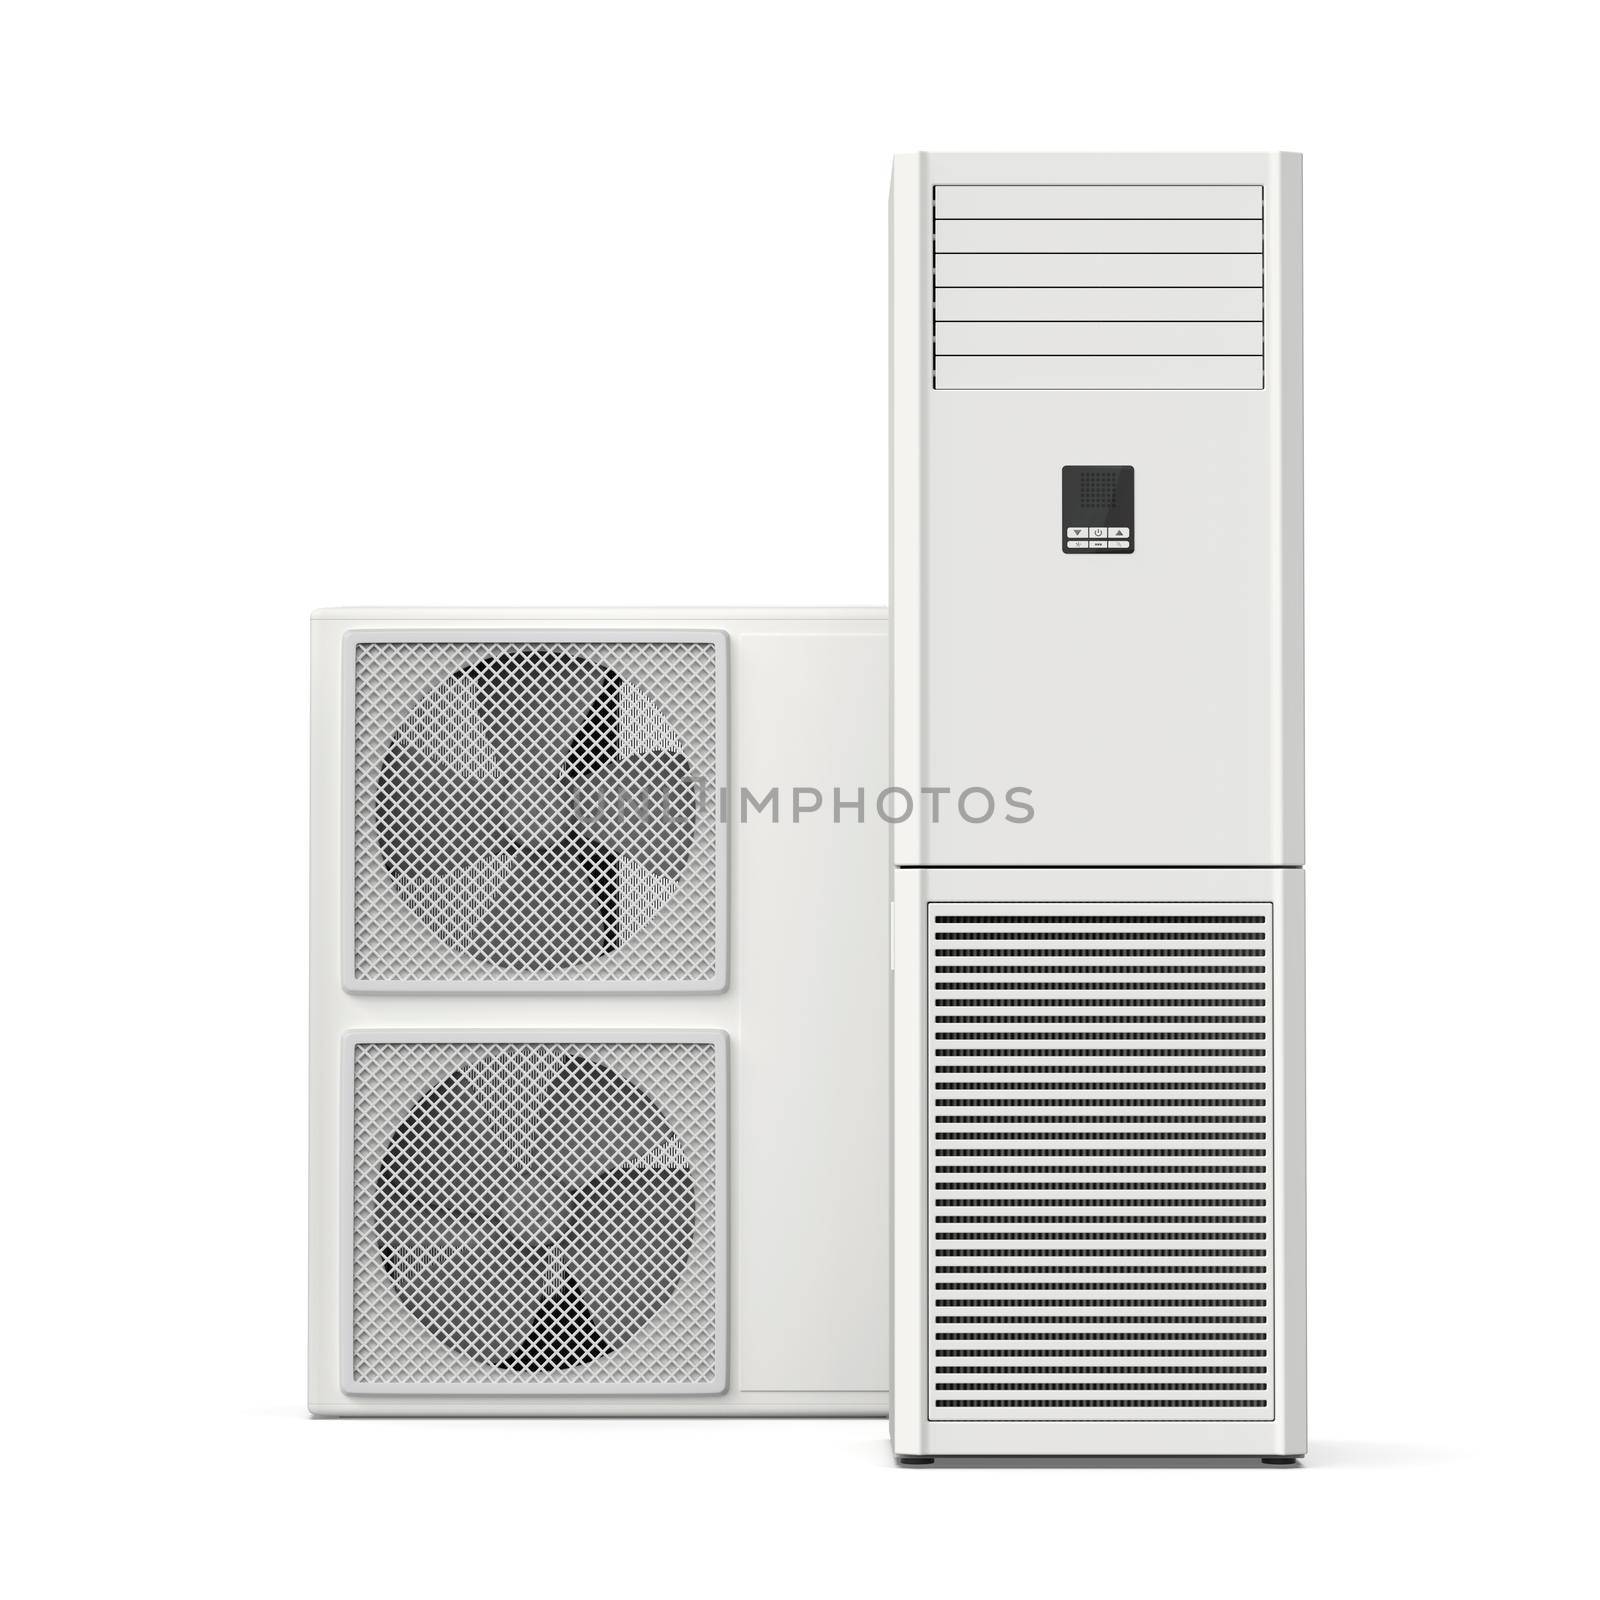 Big floor standing air conditioner on white background